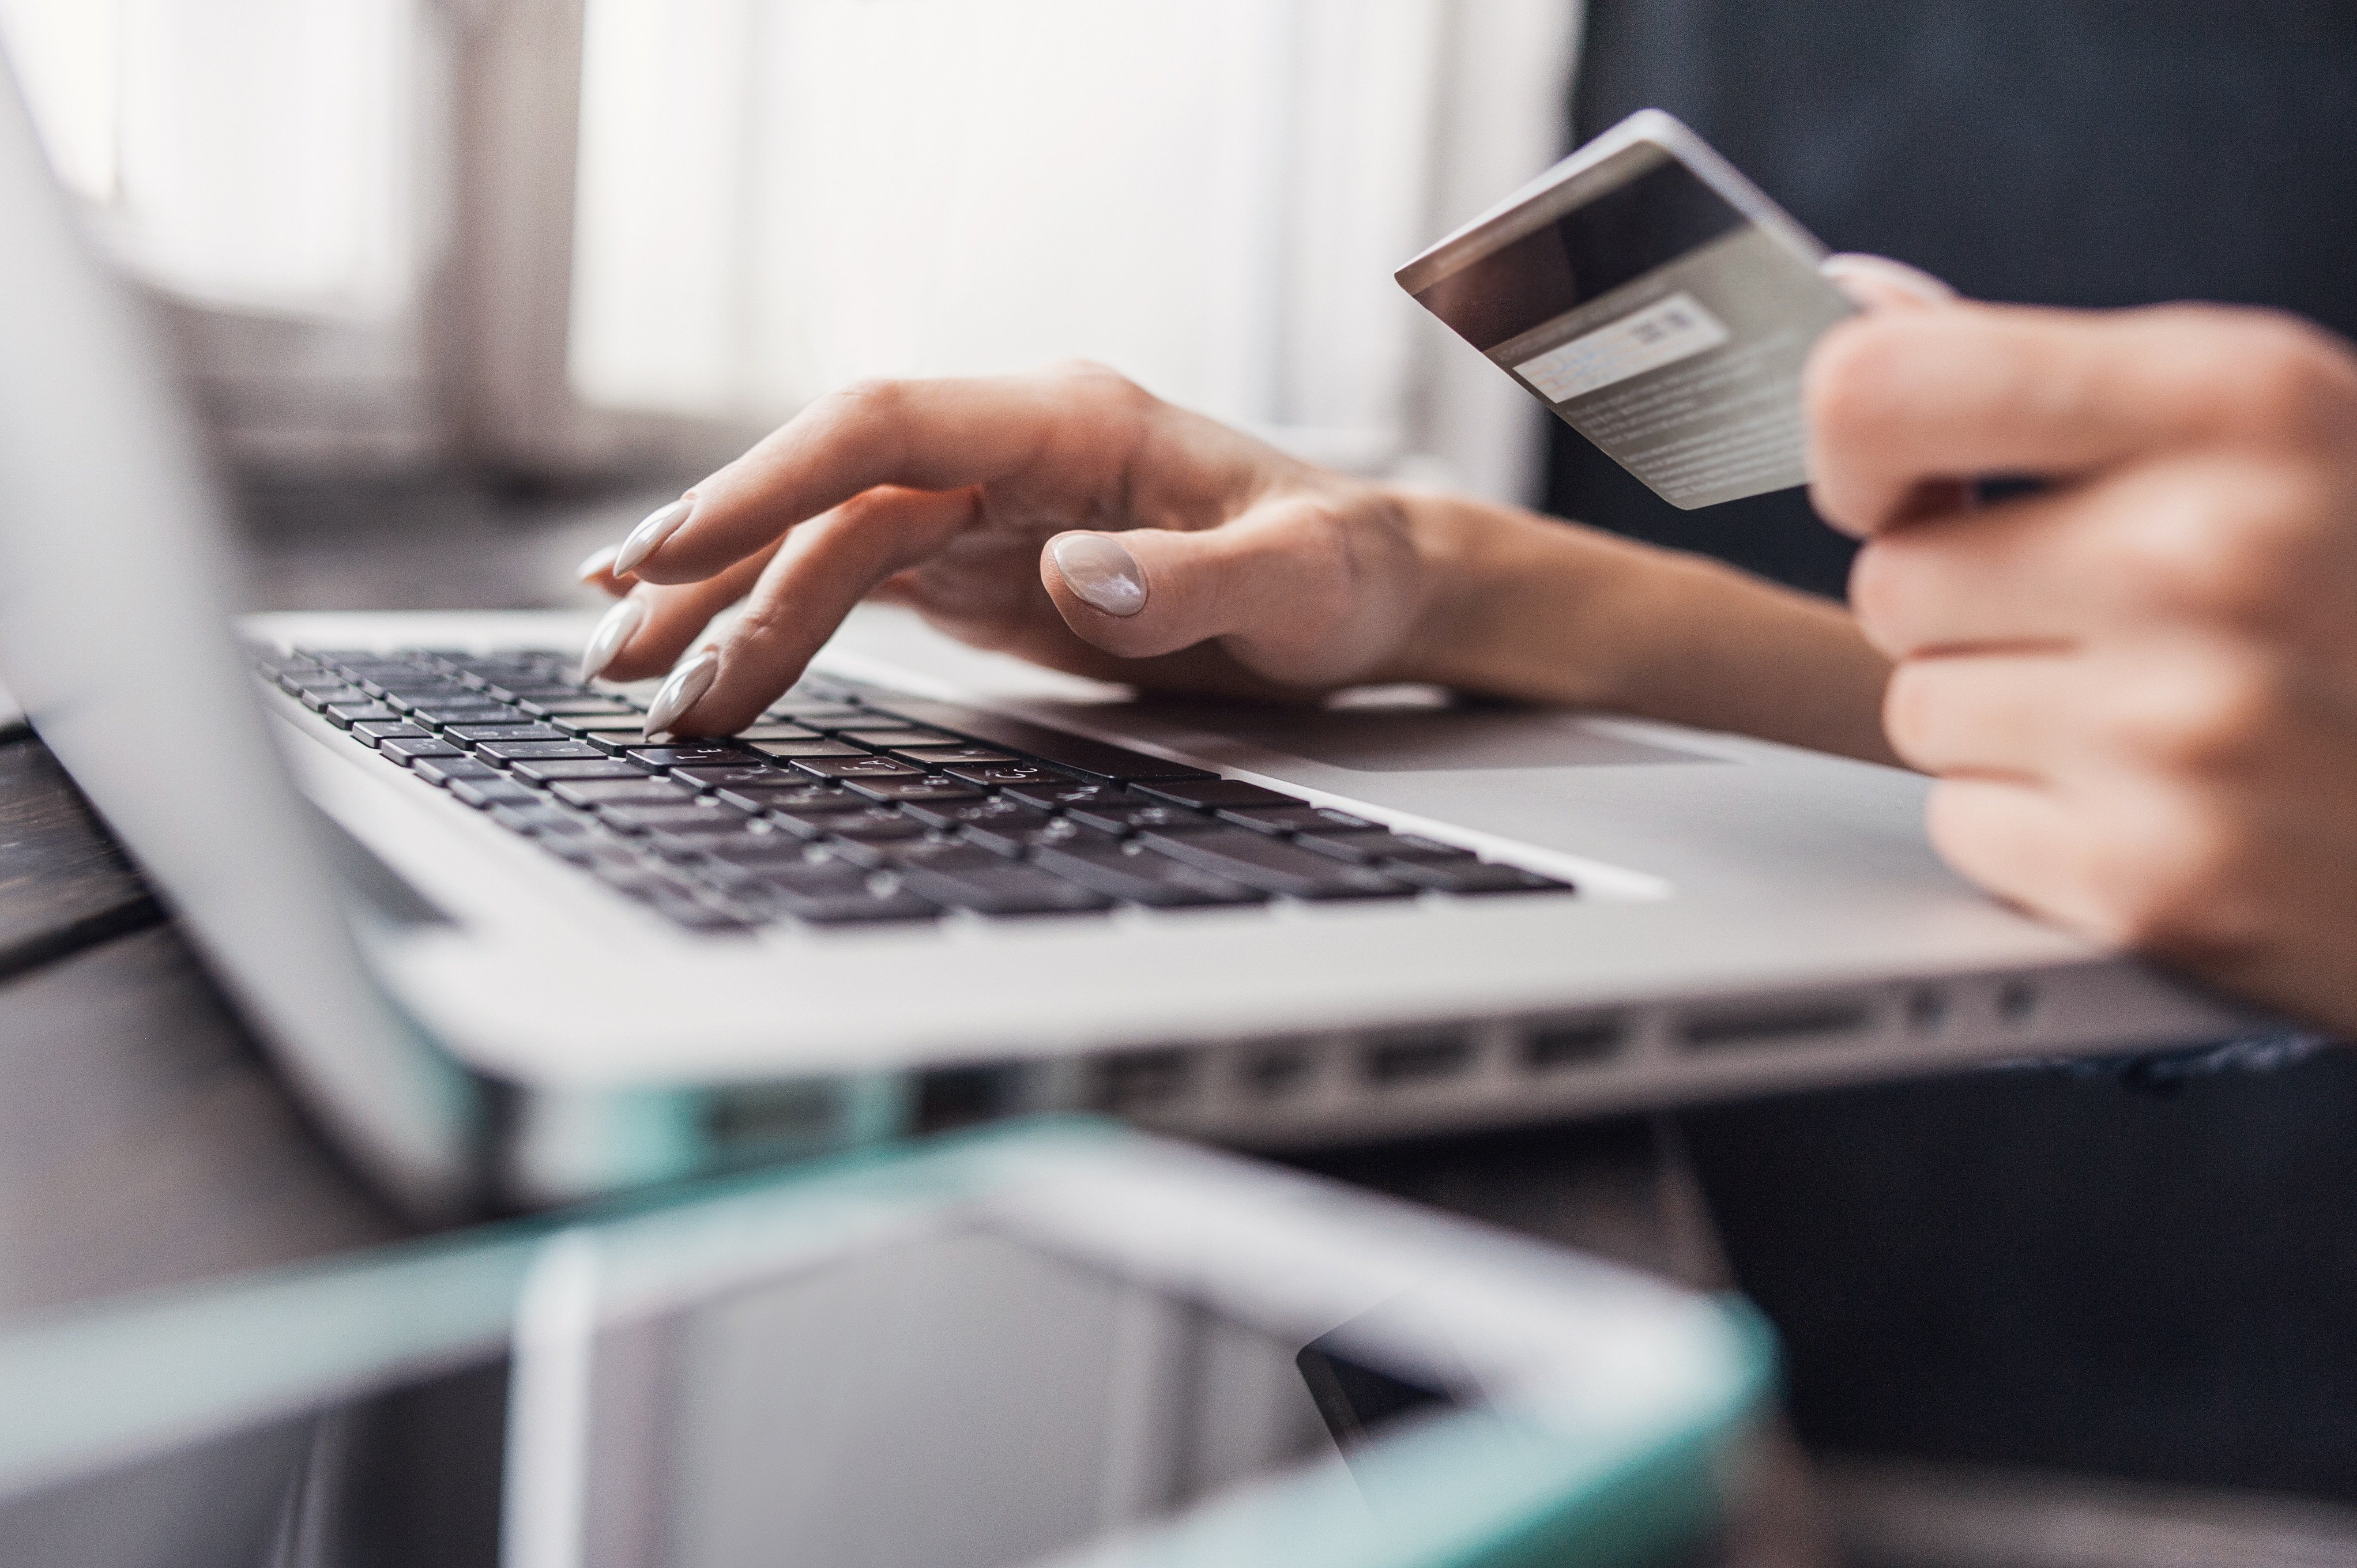 The prevalence of online shopping means data security is more important than ever. Think twice before giving away your personal information. Photo: Shutterstock